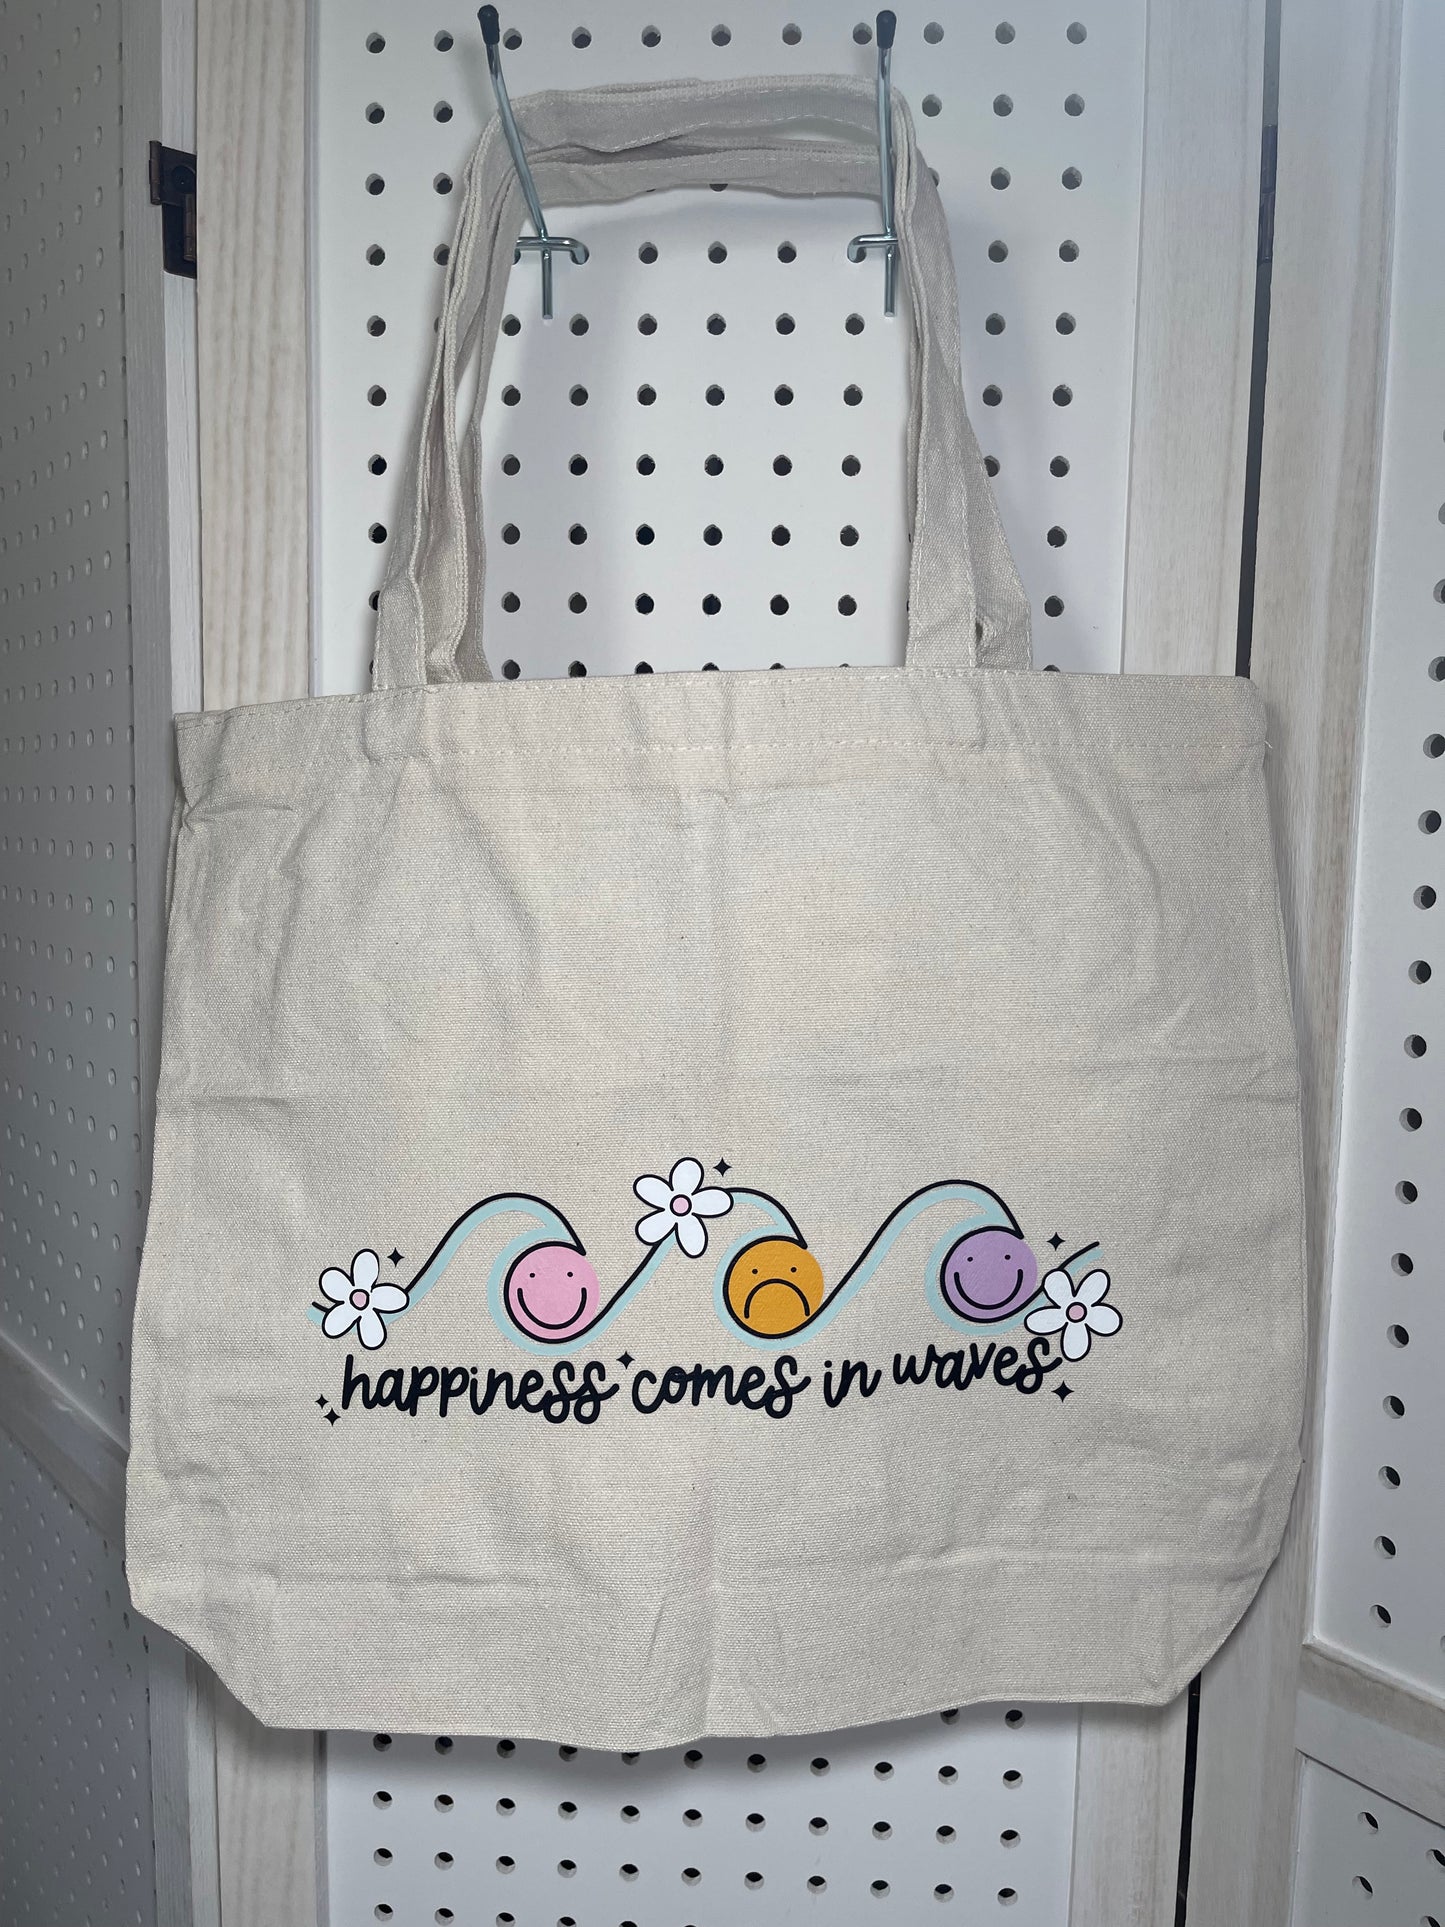 TOTE BAG | Happiness comes in waves tote